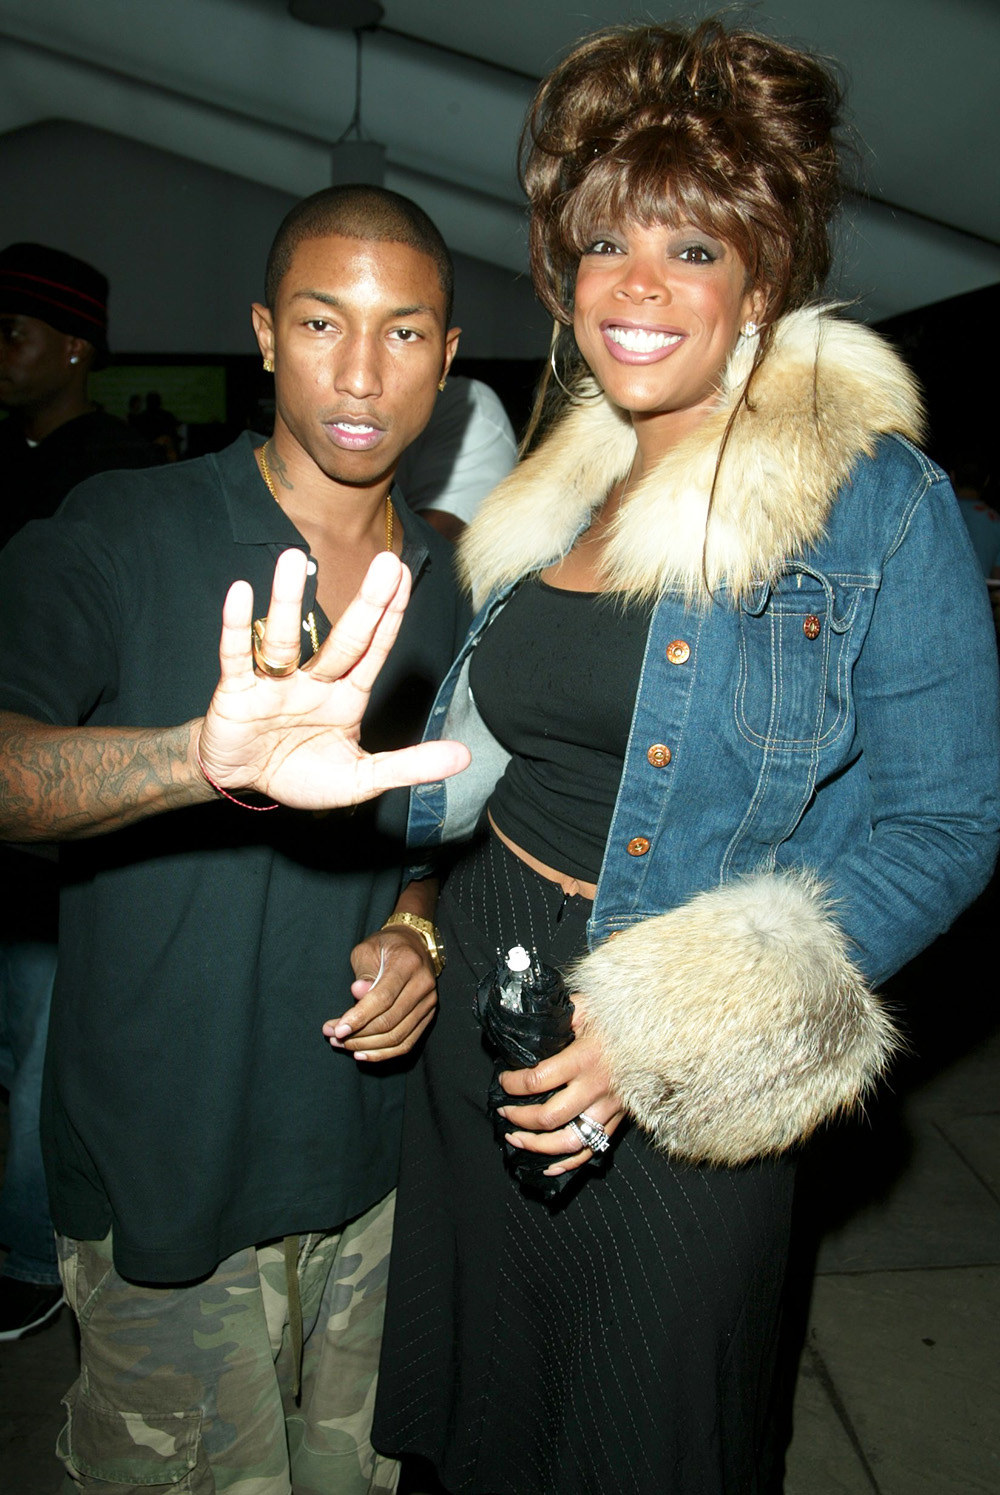 Photos: Pharrell Williams' Most Daring Looks Over the Years